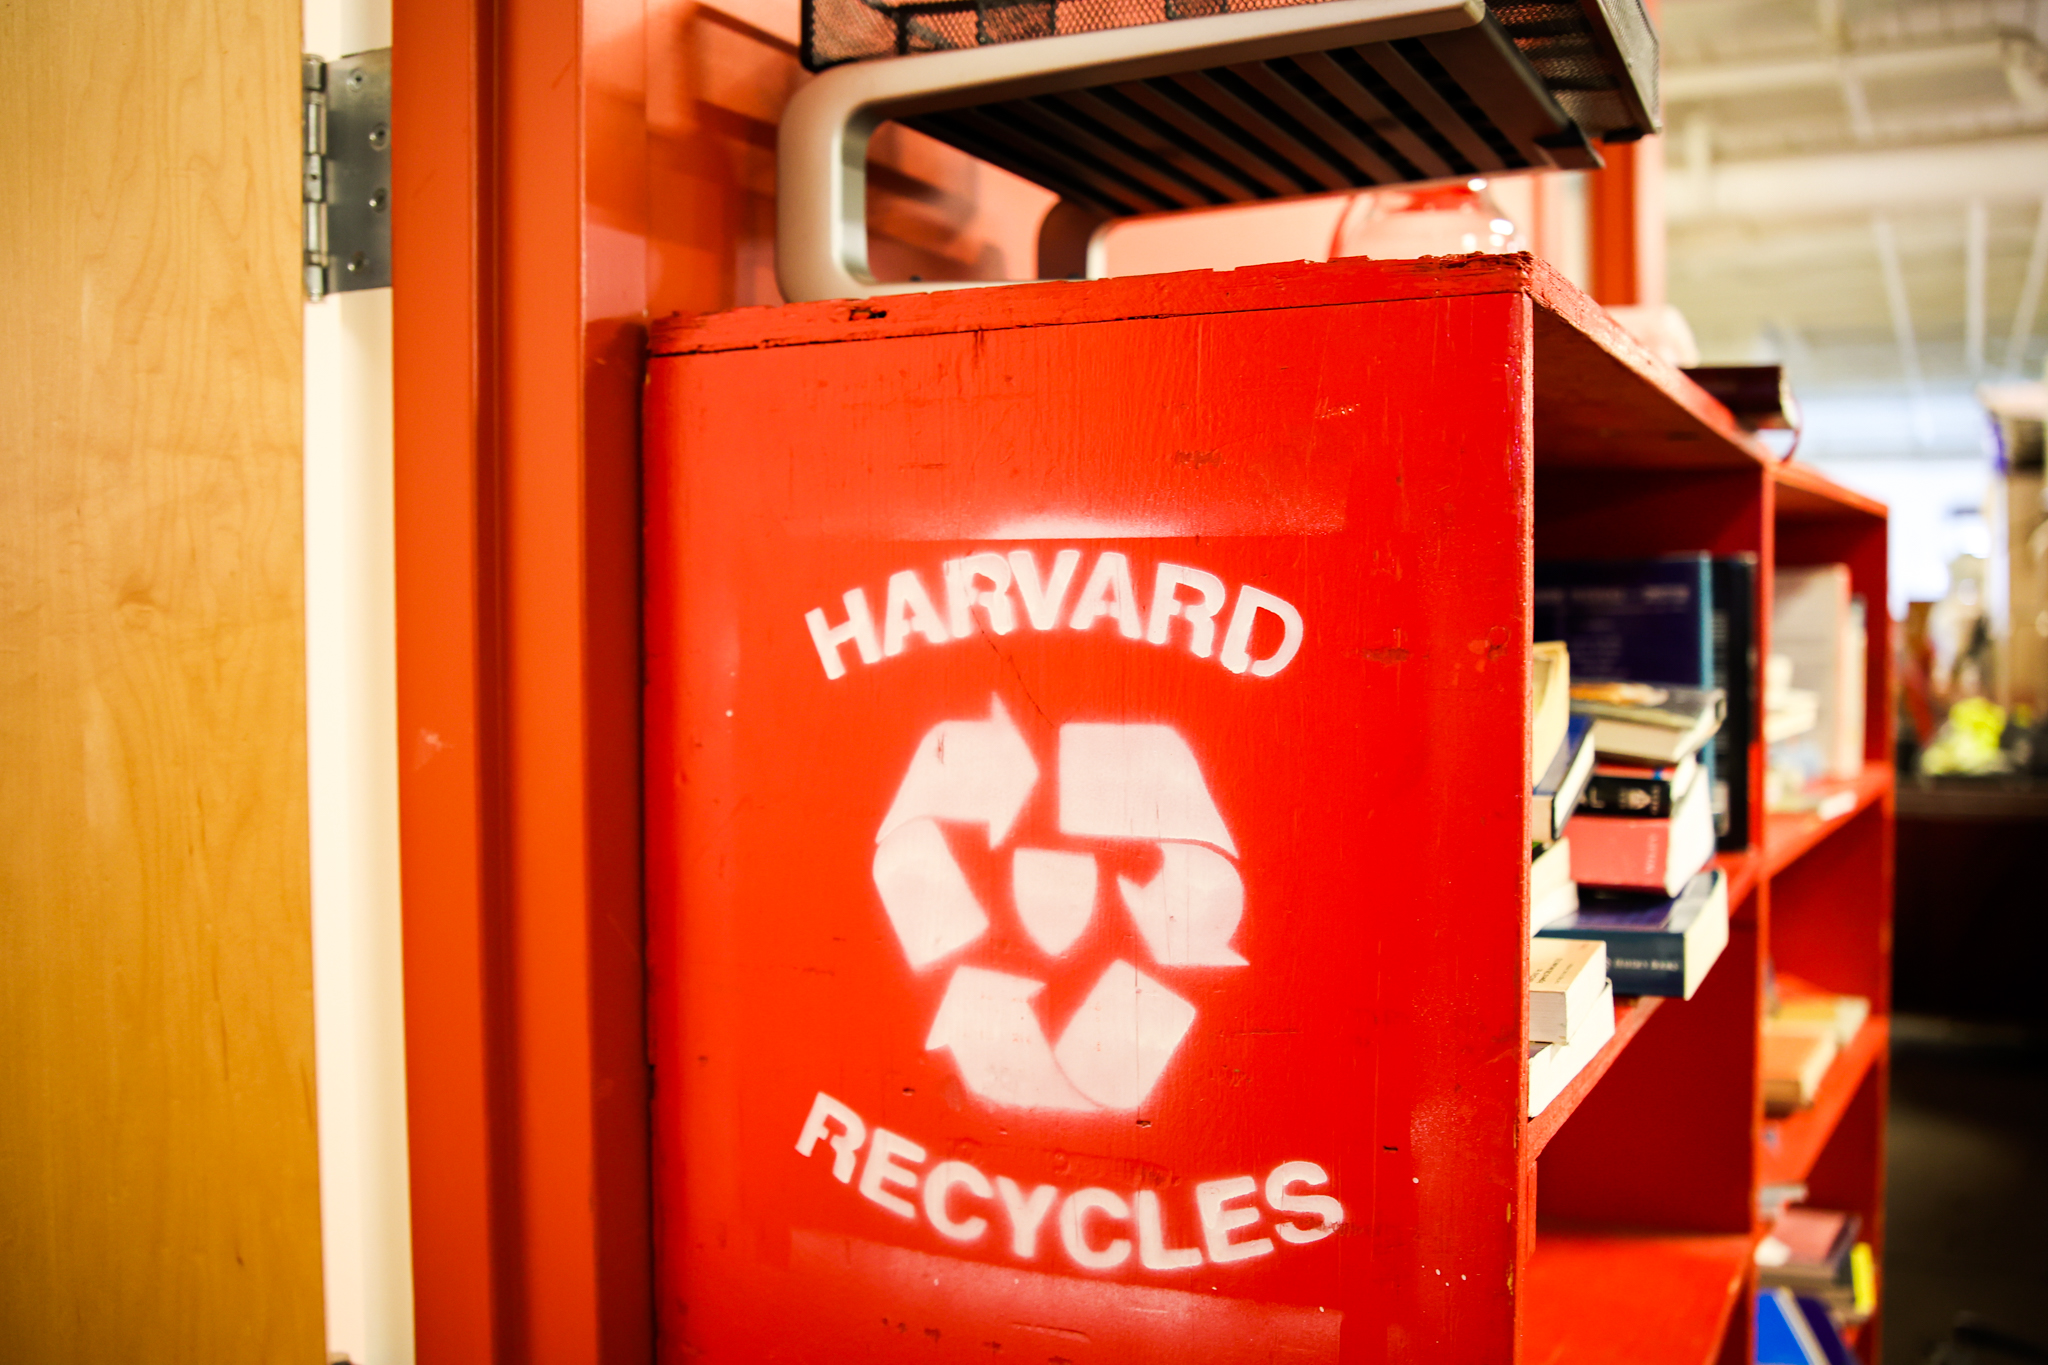 "Harvard Recycles" sign on a red bookshelf.